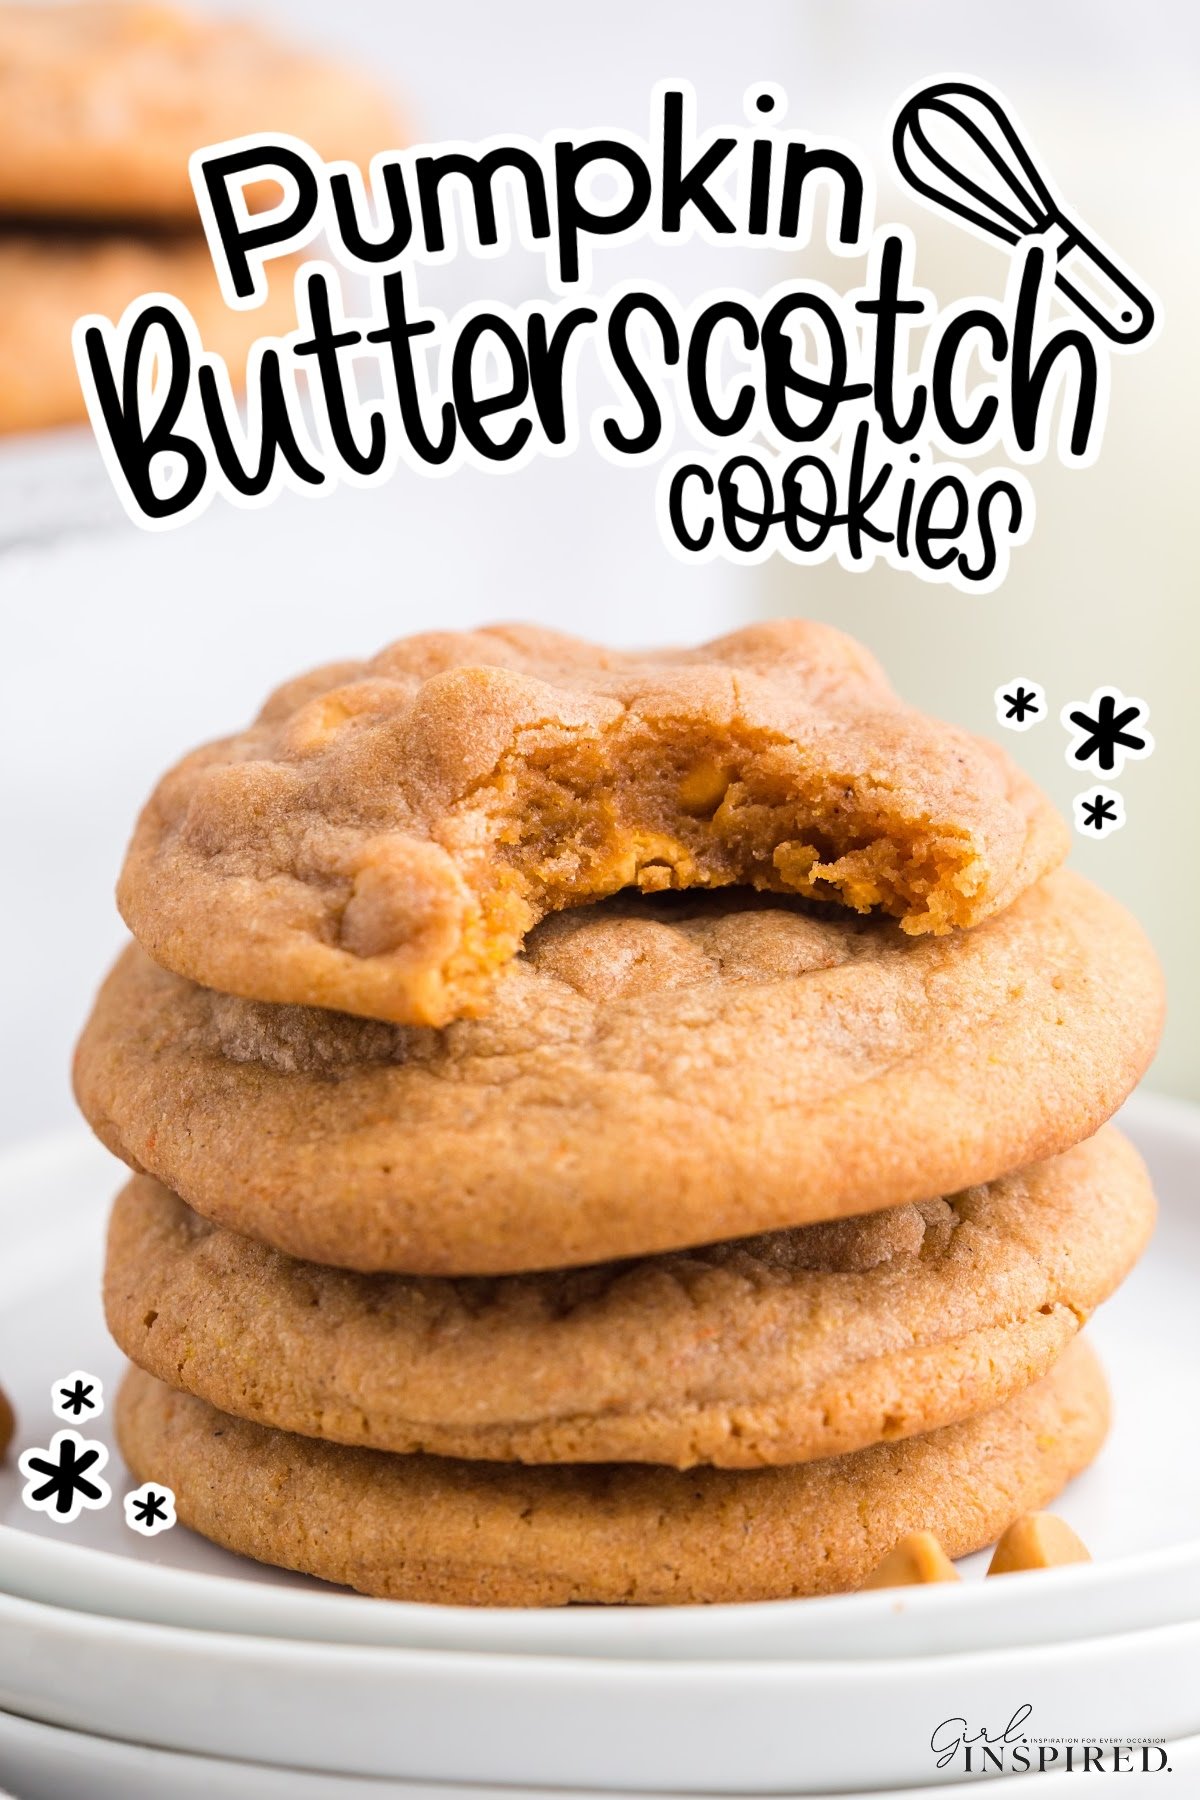 Stacked pumpkin butterscotch cookies with a bite from the otp cookie, and text overla "Pumpkin butterscotch cookies."